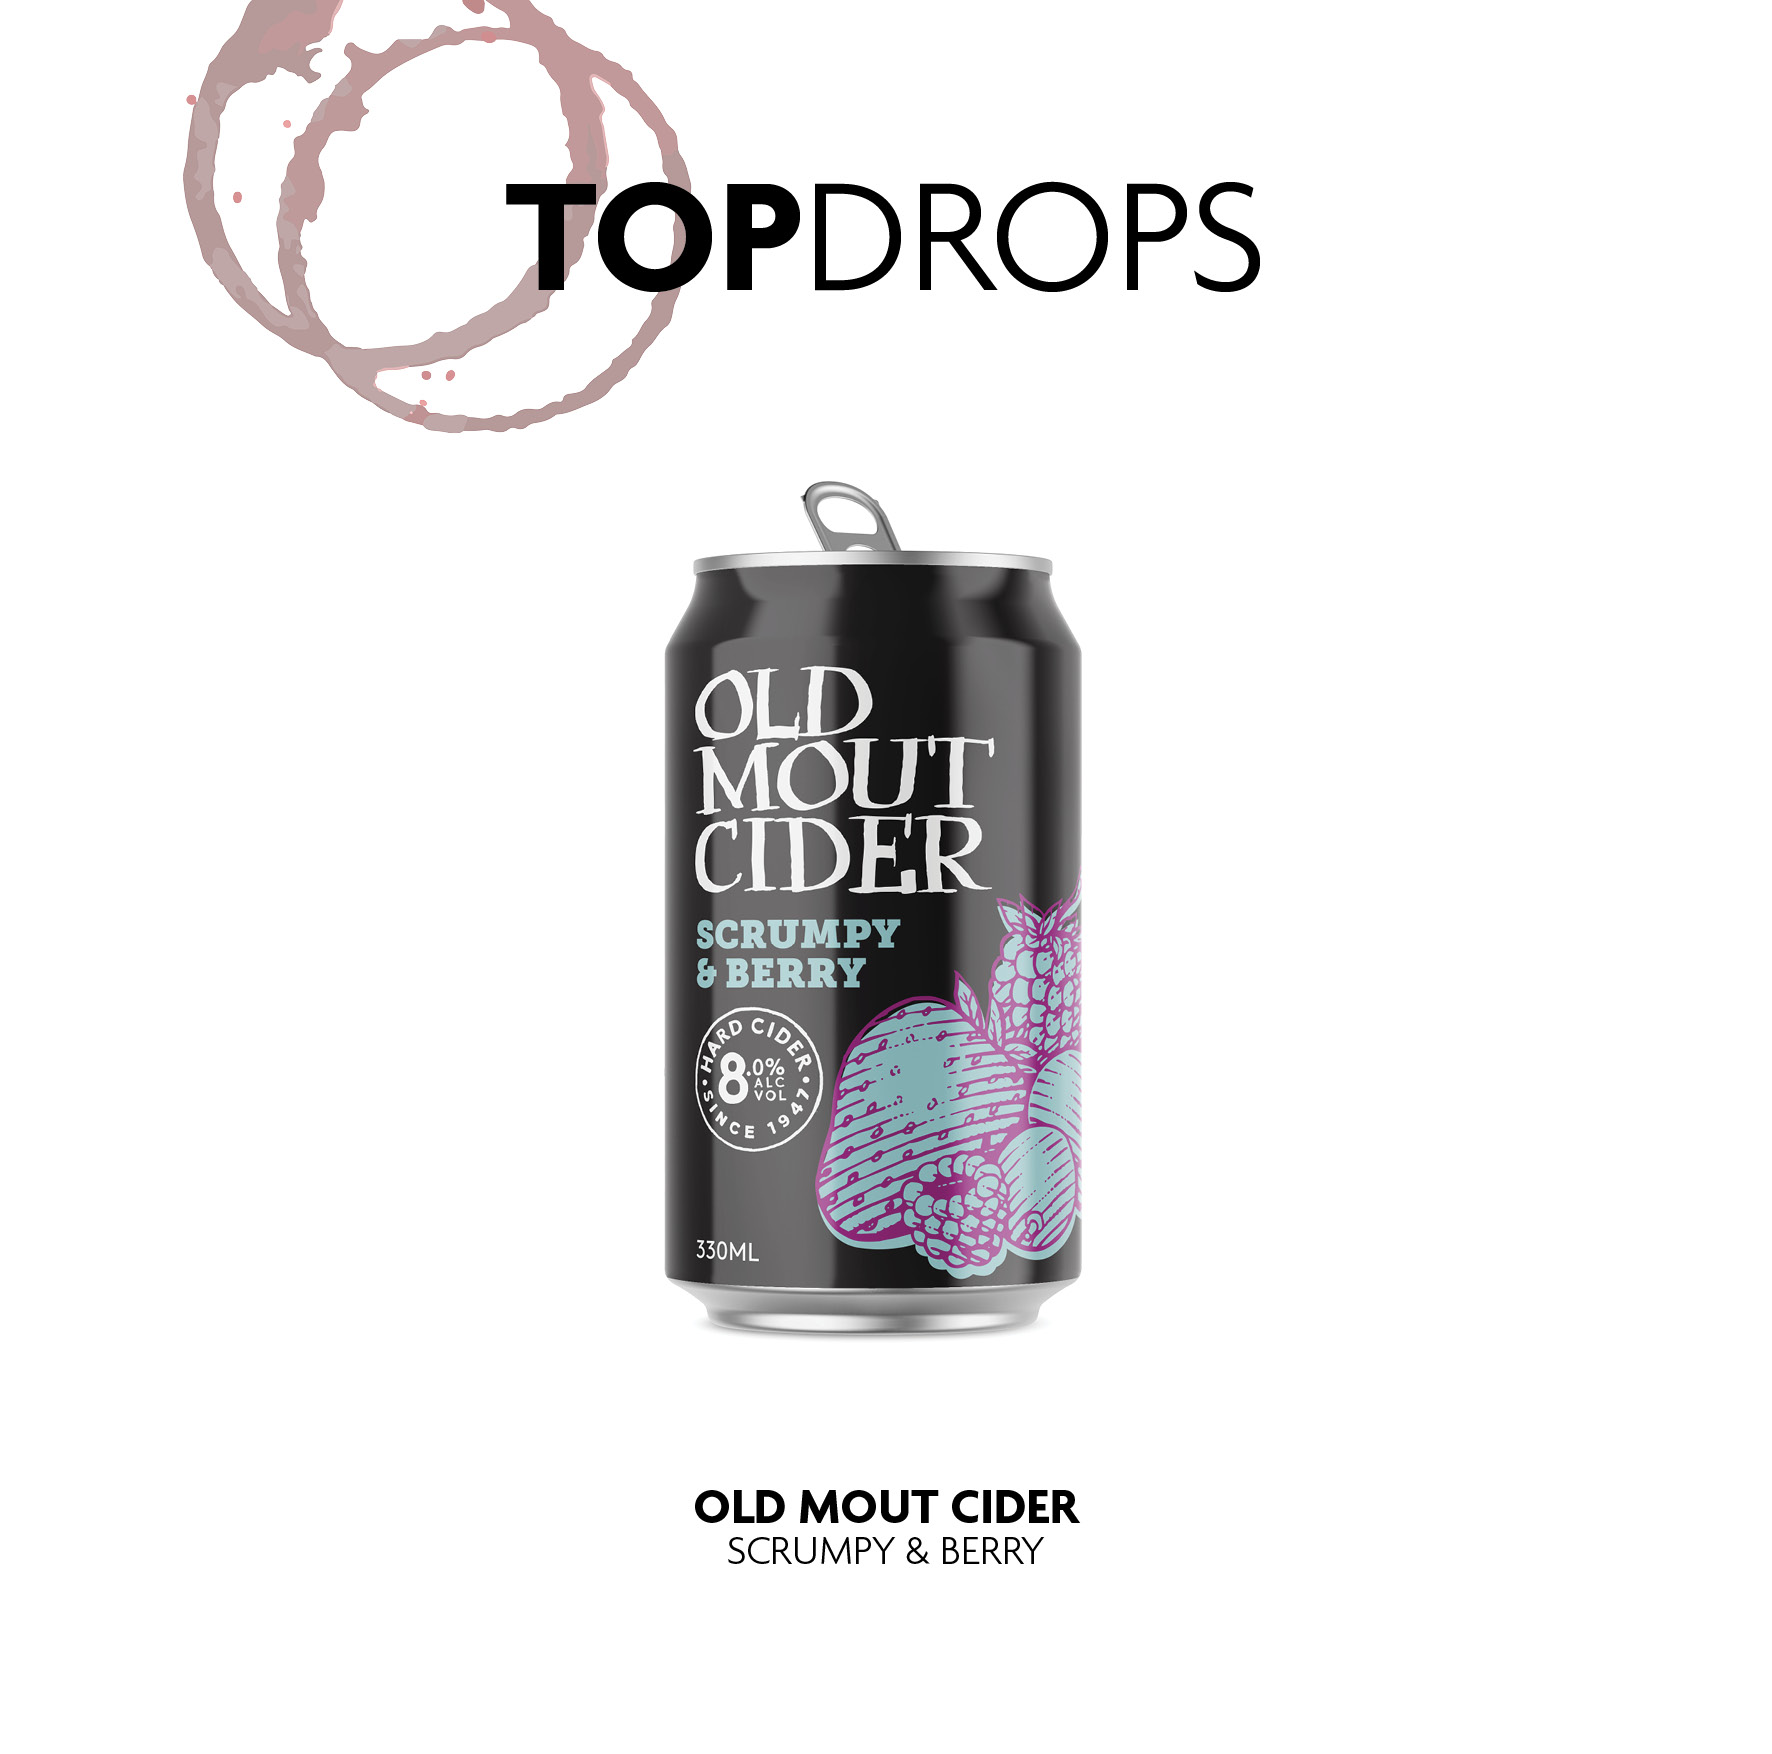 OLDMOUTCIDERBERRY